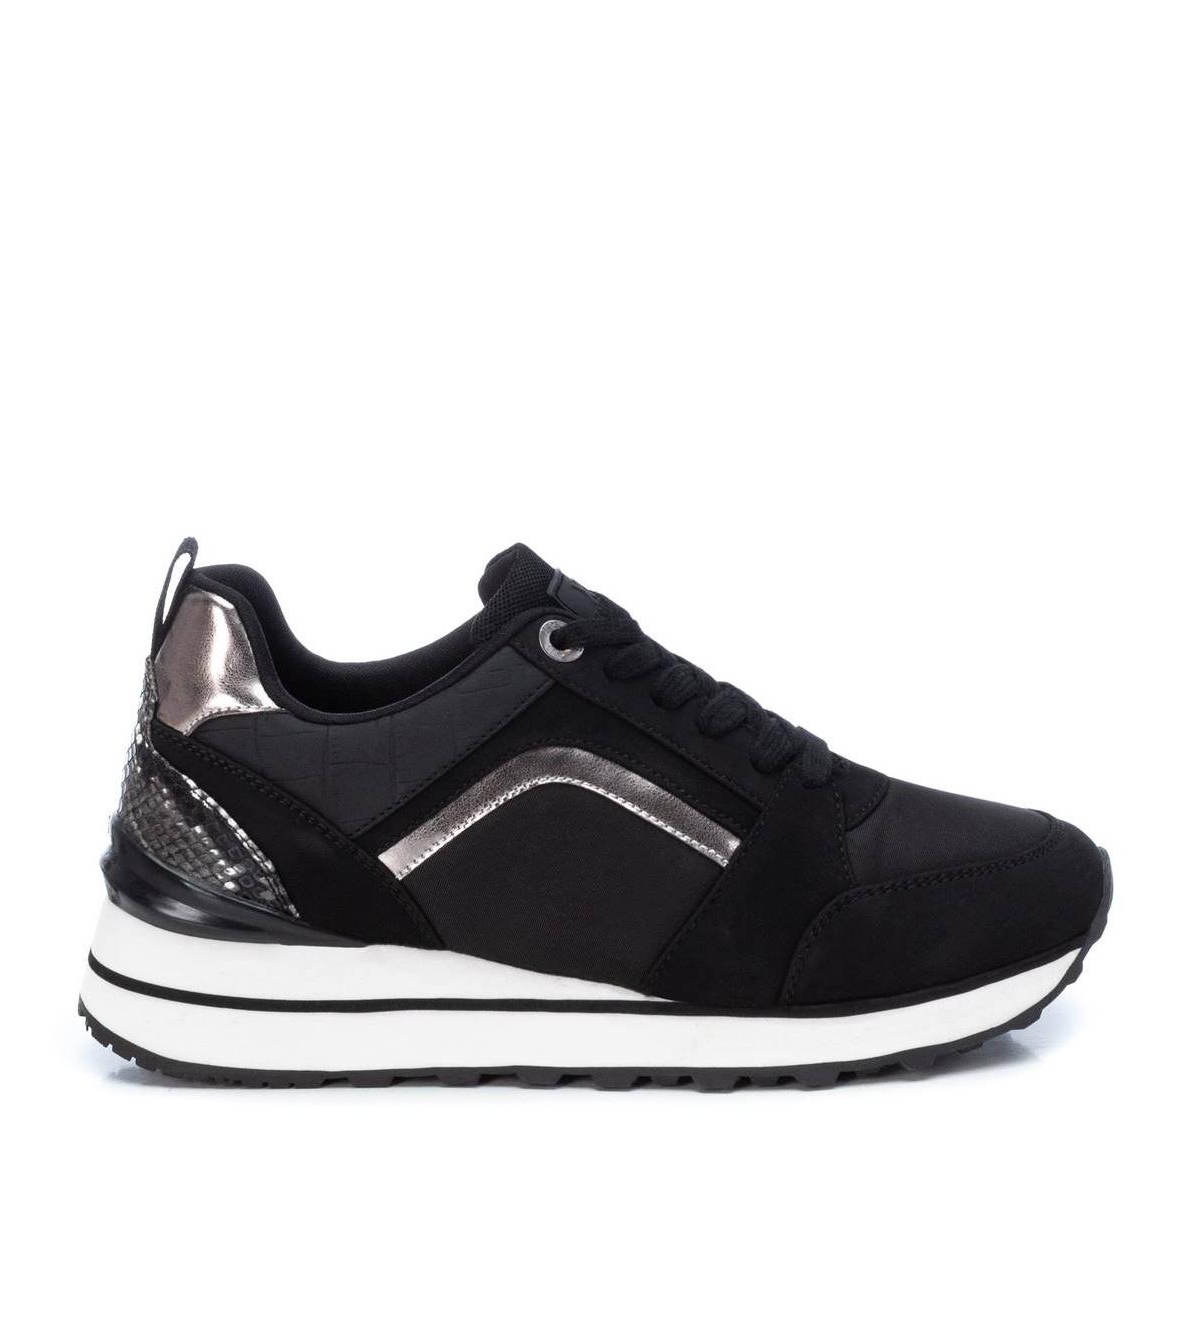 Women's Lace-Up Sneakers By Xti - Black